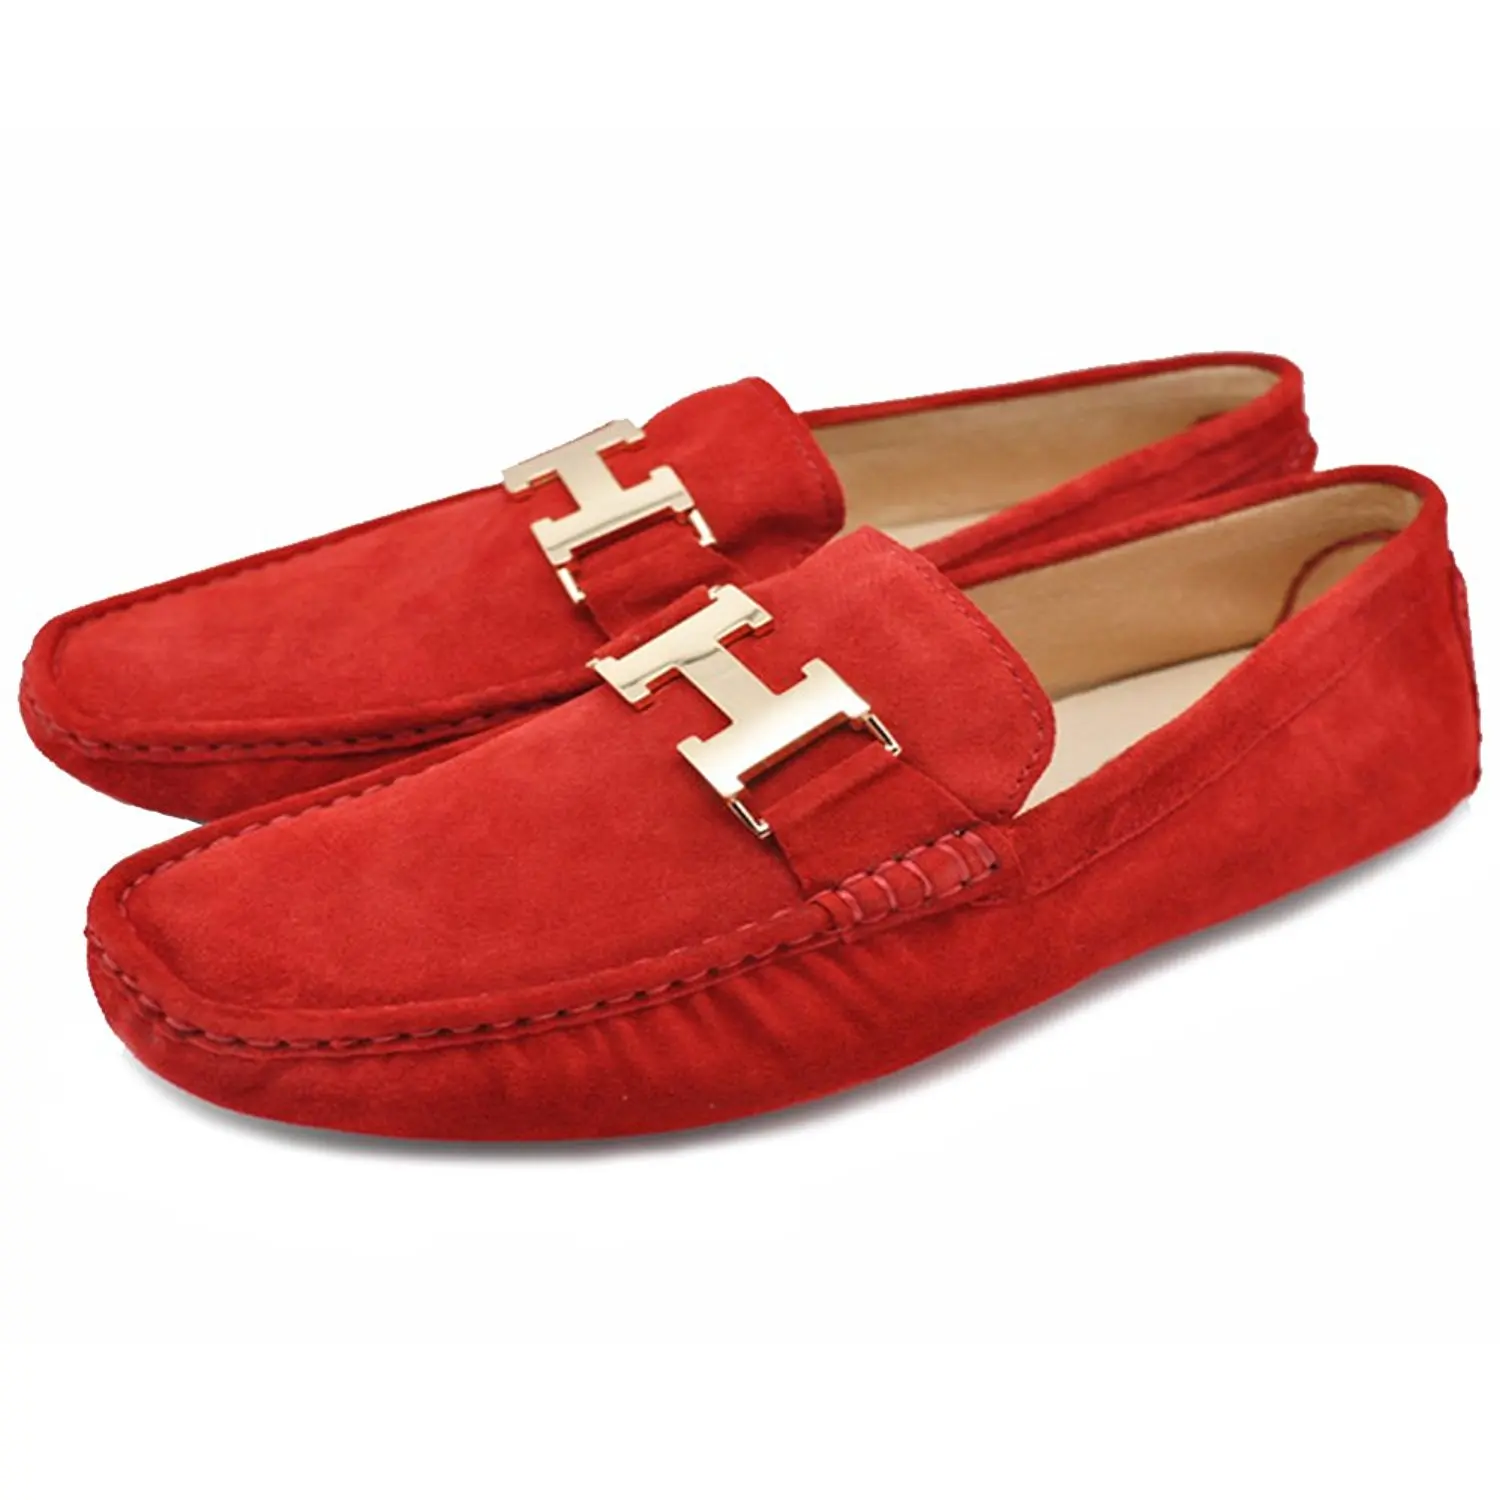 red colour loafer